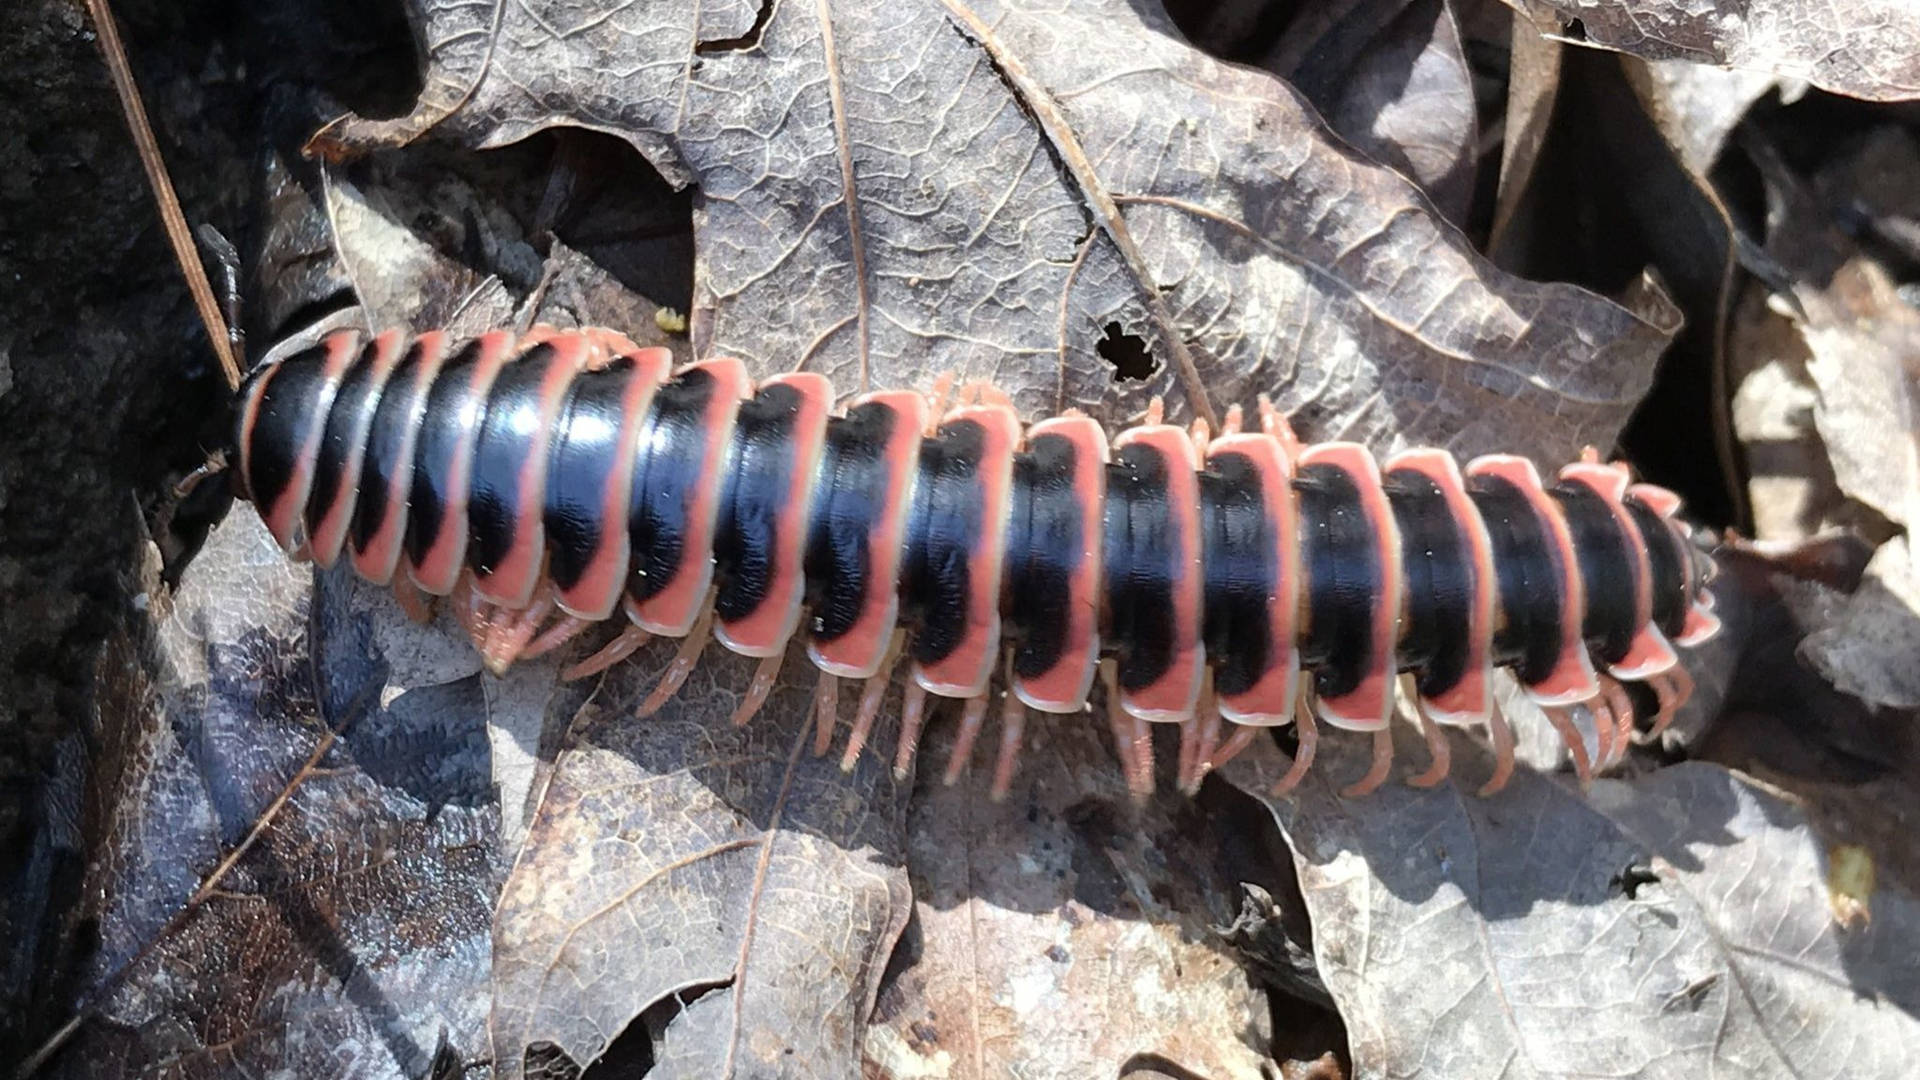 A close-up view of a Flat-Backed Millipede crawling on dry leaves Wallpaper